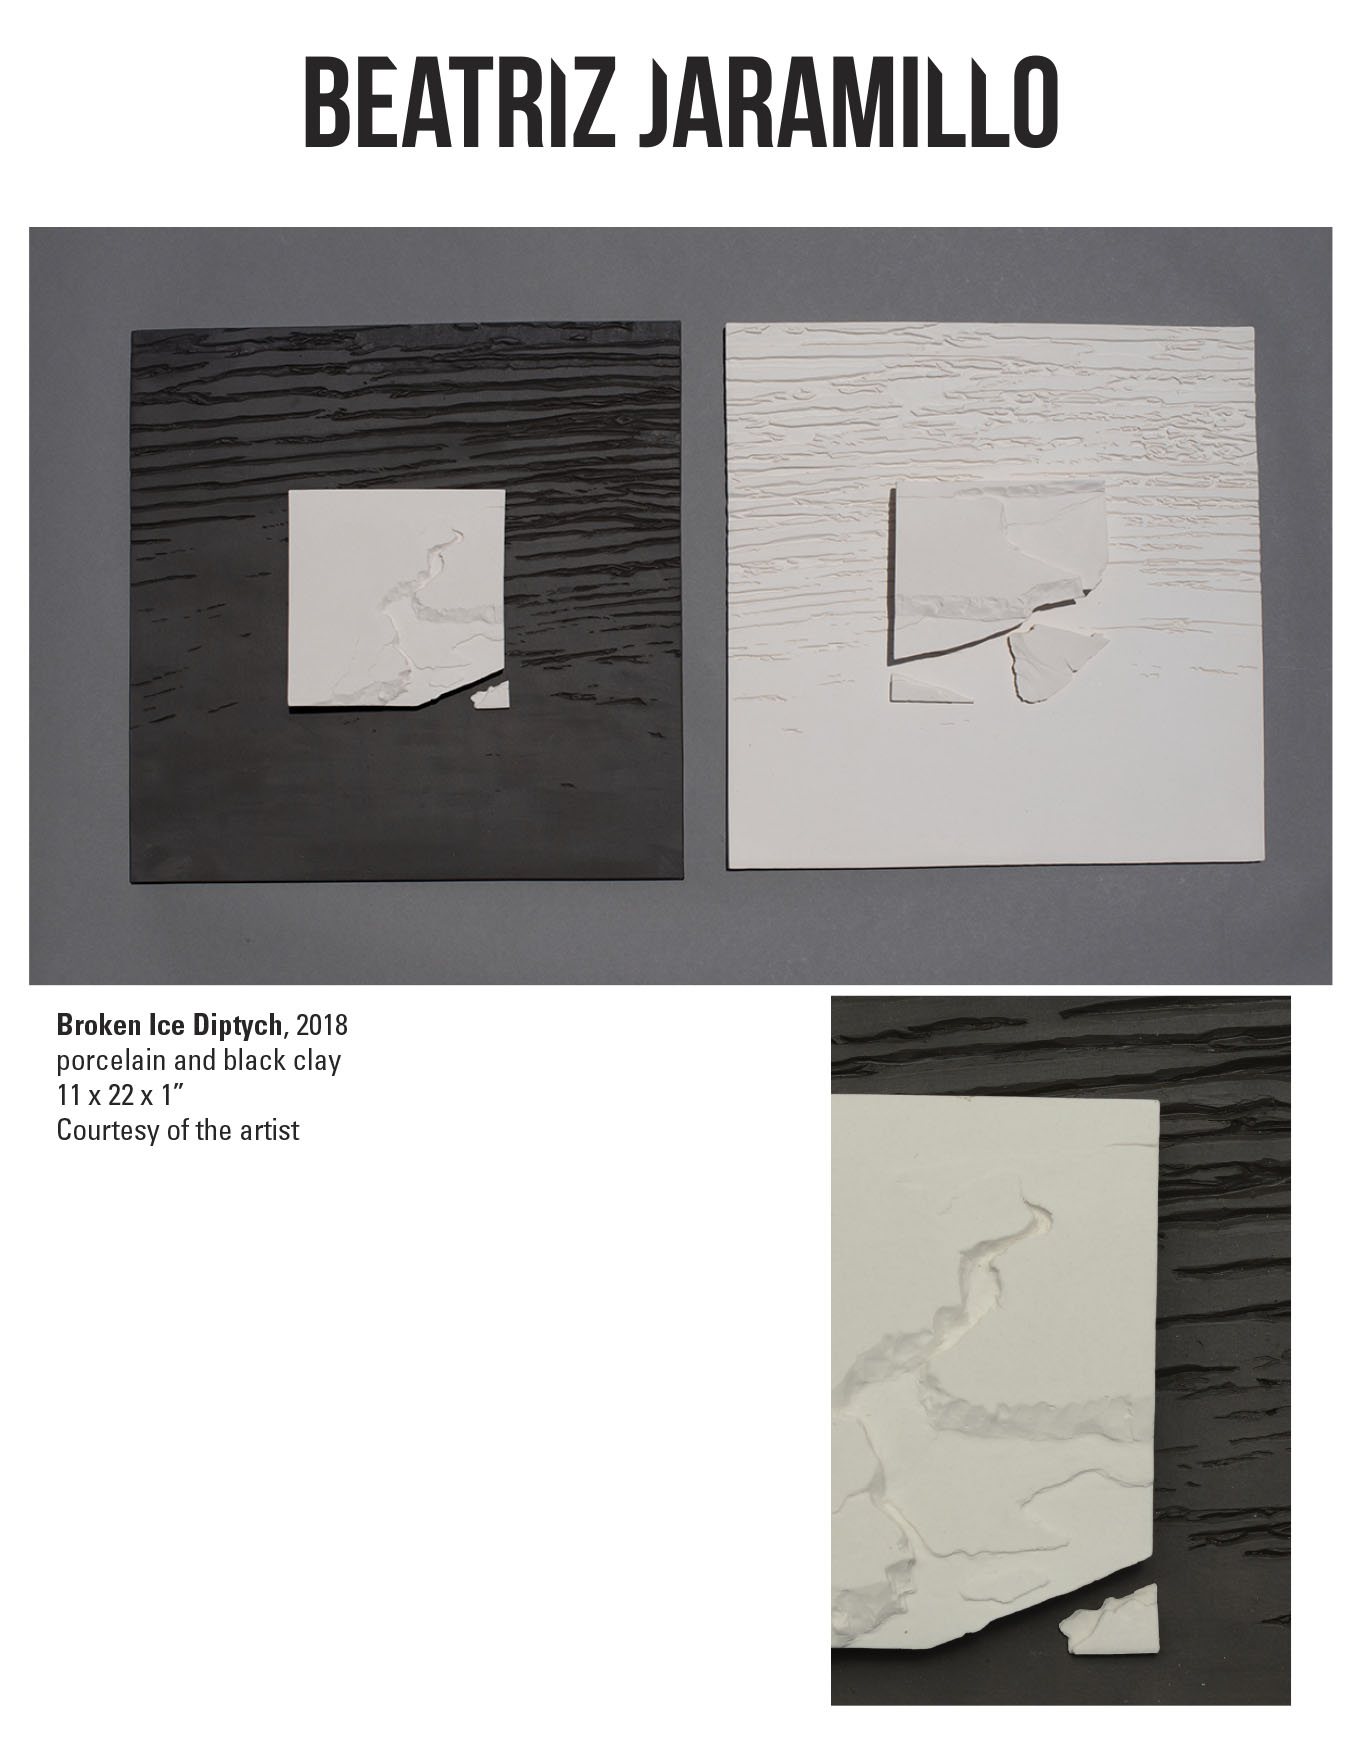 Beatriz Jaramillo, Broken Ice Diptych, 2018. Porcelain and black clay. 11 x 22 x 1” Courtesy of the artist. Two squares with a smaller shattered square placed in the center